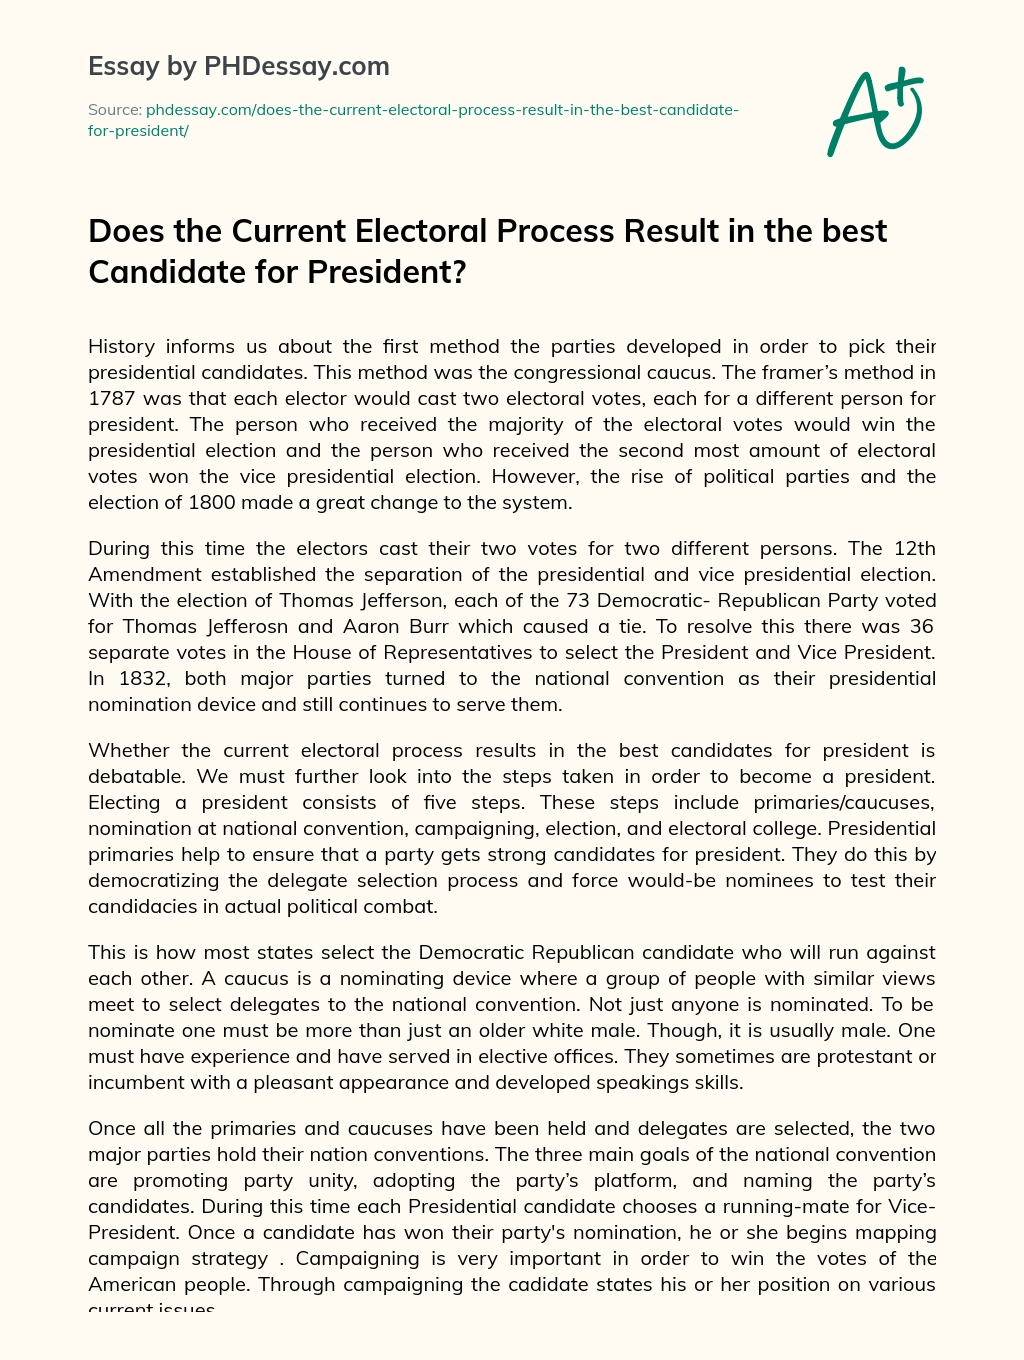 Does the Current Electoral Process Result in the best Candidate for President? essay